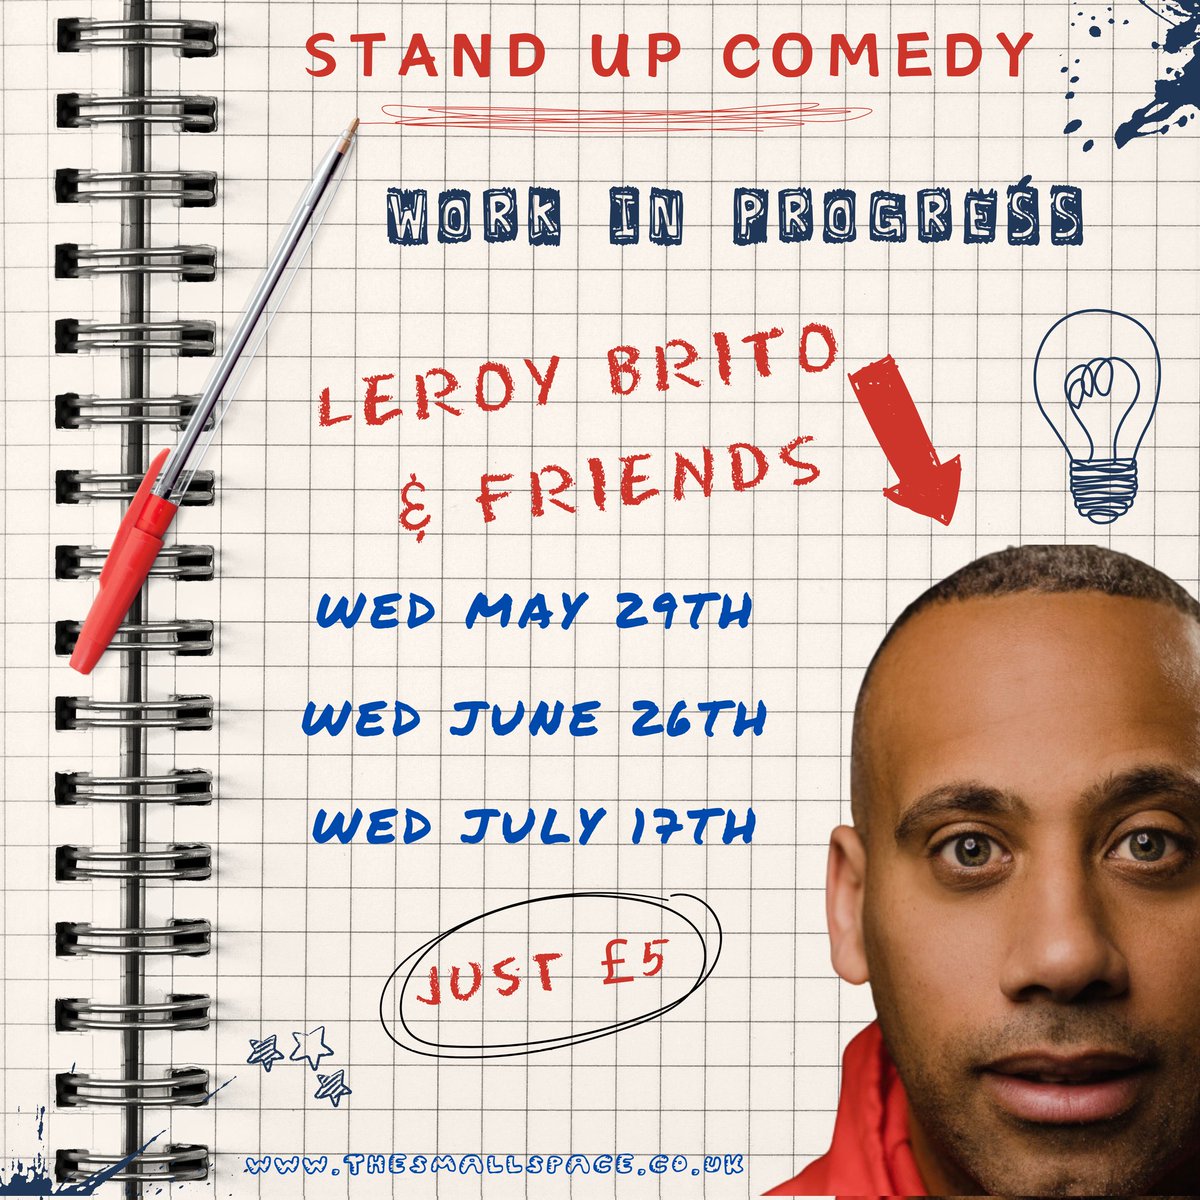 Leroy Brito is back with friends for 'Work In Progress' Stand-Up Shows top comics try new material, £5 May 29th, June 26th, July 17th Booking now thesmallspace.co.uk/whats-on #theatre #magic #comedy #livemusic #liveentertainment #Barry #cardiff #whatsoncardiff #supportlocal